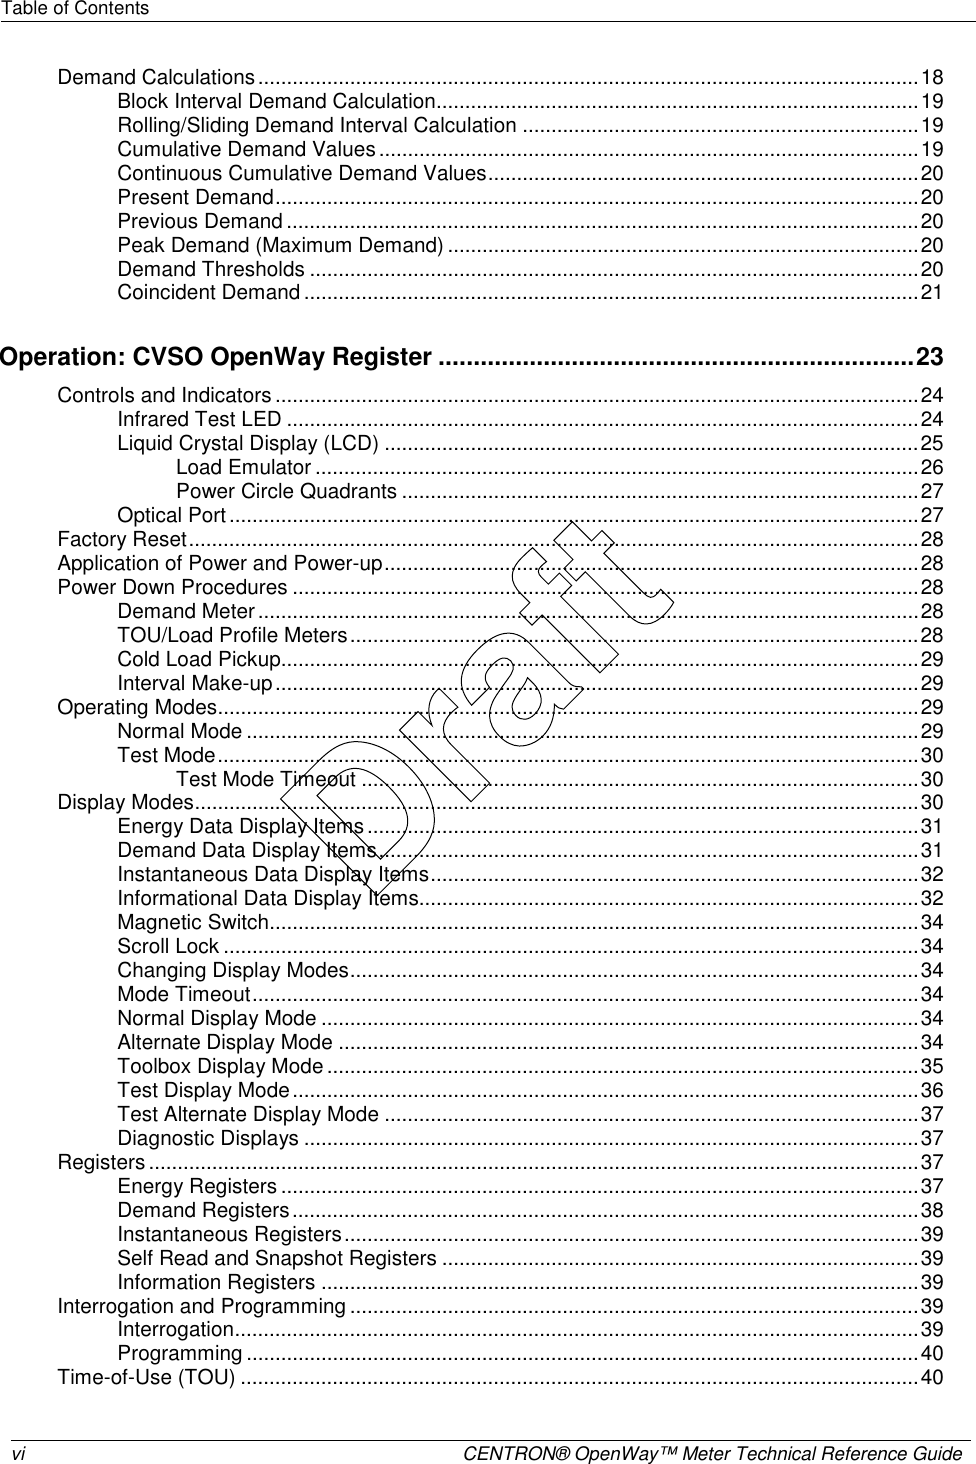 Table of Contents   vi  CENTRON® OpenWay™ Meter Technical Reference Guide   Demand Calculations...................................................................................................................18 Block Interval Demand Calculation....................................................................................19 Rolling/Sliding Demand Interval Calculation .....................................................................19 Cumulative Demand Values..............................................................................................19 Continuous Cumulative Demand Values...........................................................................20 Present Demand................................................................................................................20 Previous Demand ..............................................................................................................20 Peak Demand (Maximum Demand) ..................................................................................20 Demand Thresholds ..........................................................................................................20 Coincident Demand ...........................................................................................................21 Operation: CVSO OpenWay Register ....................................................................23 Controls and Indicators ................................................................................................................24 Infrared Test LED ..............................................................................................................24 Liquid Crystal Display (LCD) .............................................................................................25 Load Emulator .........................................................................................................26 Power Circle Quadrants ..........................................................................................27 Optical Port ........................................................................................................................27 Factory Reset...............................................................................................................................28 Application of Power and Power-up.............................................................................................28 Power Down Procedures .............................................................................................................28 Demand Meter ...................................................................................................................28 TOU/Load Profile Meters...................................................................................................28 Cold Load Pickup...............................................................................................................29 Interval Make-up................................................................................................................29 Operating Modes..........................................................................................................................29 Normal Mode .....................................................................................................................29 Test Mode..........................................................................................................................30 Test Mode Timeout .................................................................................................30 Display Modes..............................................................................................................................30 Energy Data Display Items................................................................................................31 Demand Data Display Items..............................................................................................31 Instantaneous Data Display Items.....................................................................................32 Informational Data Display Items.......................................................................................32 Magnetic Switch.................................................................................................................34 Scroll Lock .........................................................................................................................34 Changing Display Modes...................................................................................................34 Mode Timeout....................................................................................................................34 Normal Display Mode ........................................................................................................34 Alternate Display Mode .....................................................................................................34 Toolbox Display Mode .......................................................................................................35 Test Display Mode.............................................................................................................36 Test Alternate Display Mode .............................................................................................37 Diagnostic Displays ...........................................................................................................37 Registers ......................................................................................................................................37 Energy Registers ...............................................................................................................37 Demand Registers.............................................................................................................38 Instantaneous Registers....................................................................................................39 Self Read and Snapshot Registers ...................................................................................39 Information Registers ........................................................................................................39 Interrogation and Programming ...................................................................................................39 Interrogation.......................................................................................................................39 Programming .....................................................................................................................40 Time-of-Use (TOU) ......................................................................................................................40 Draft